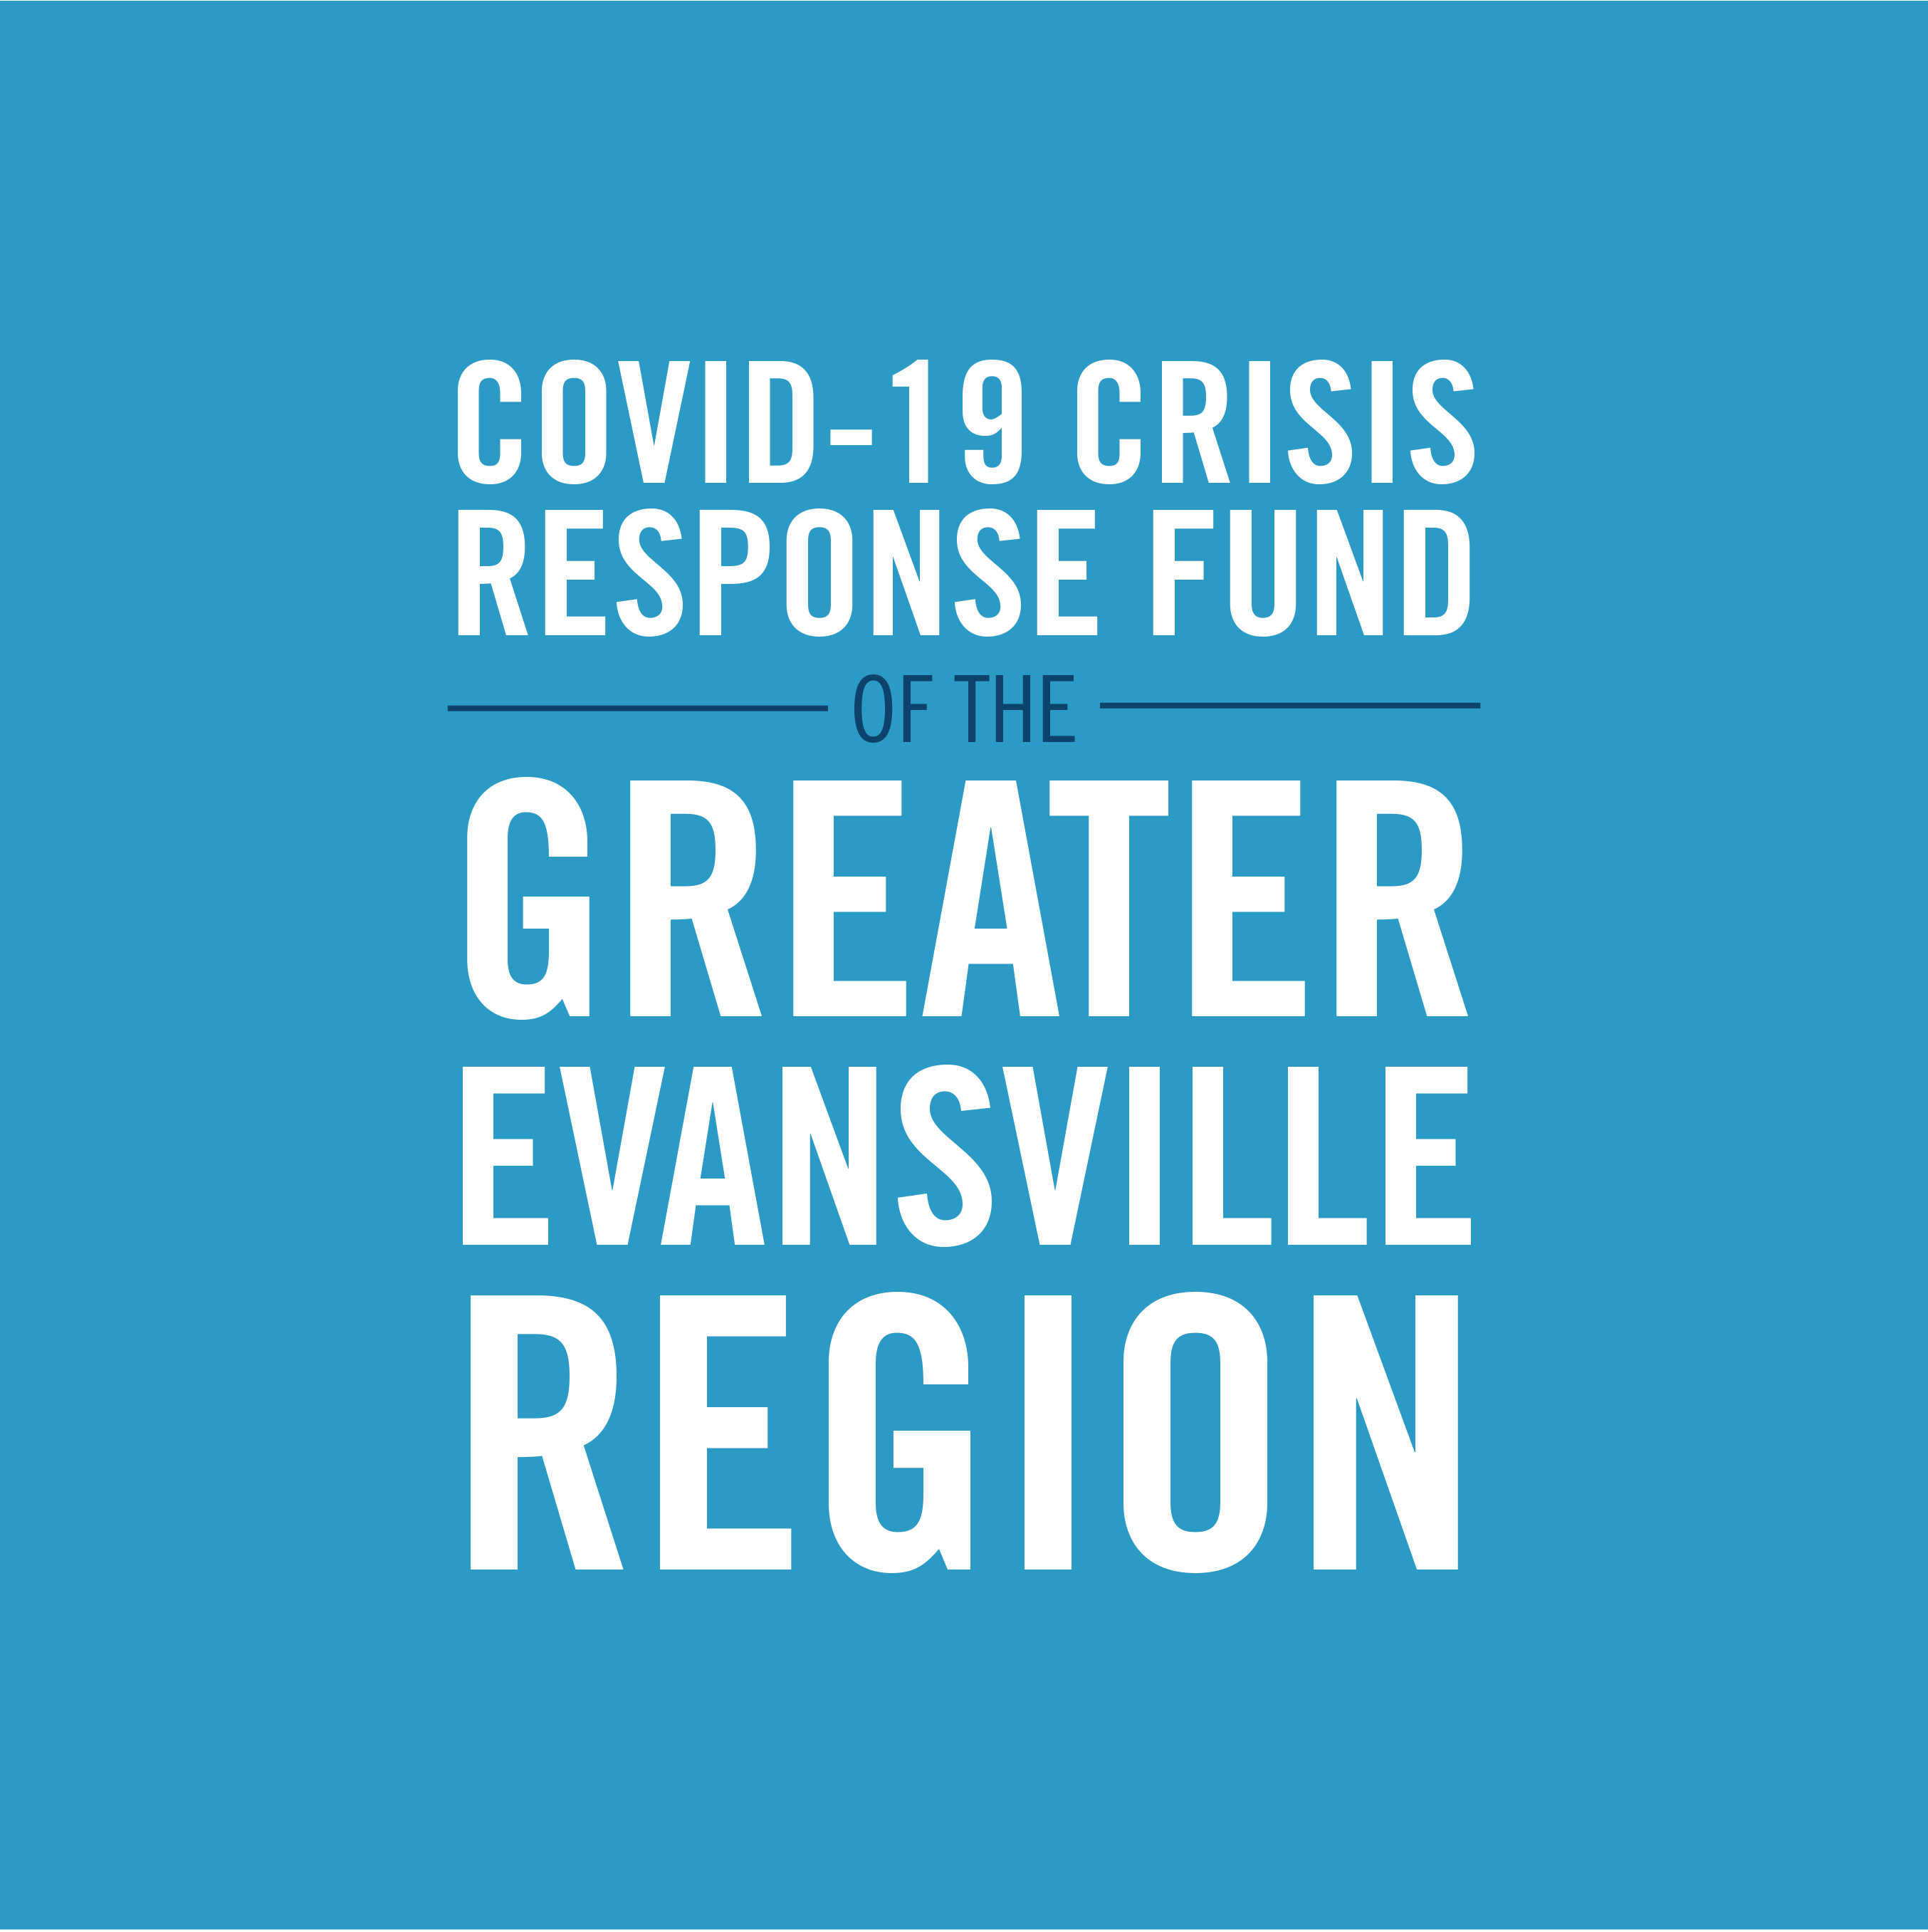 The COVID-19 Crisis Response Fund of the Greater Evansville Region